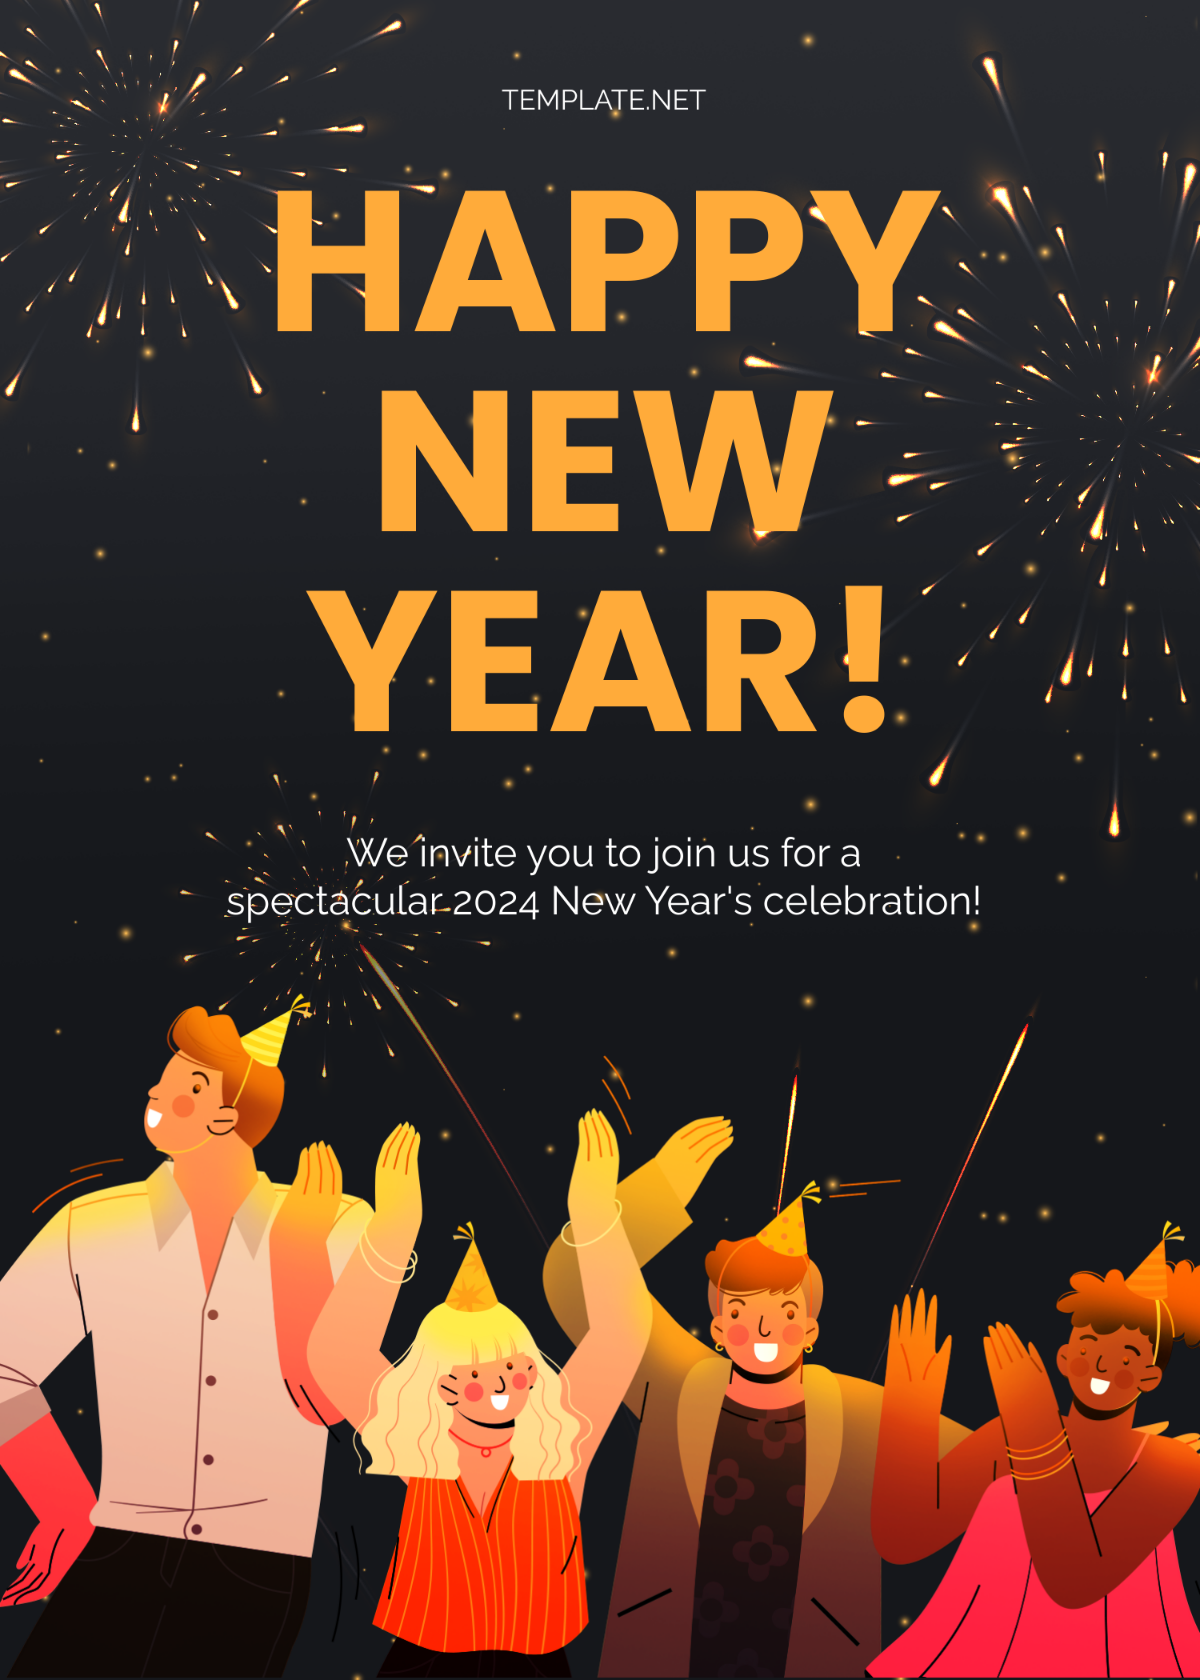 Free New Year Greetings Invitation Template